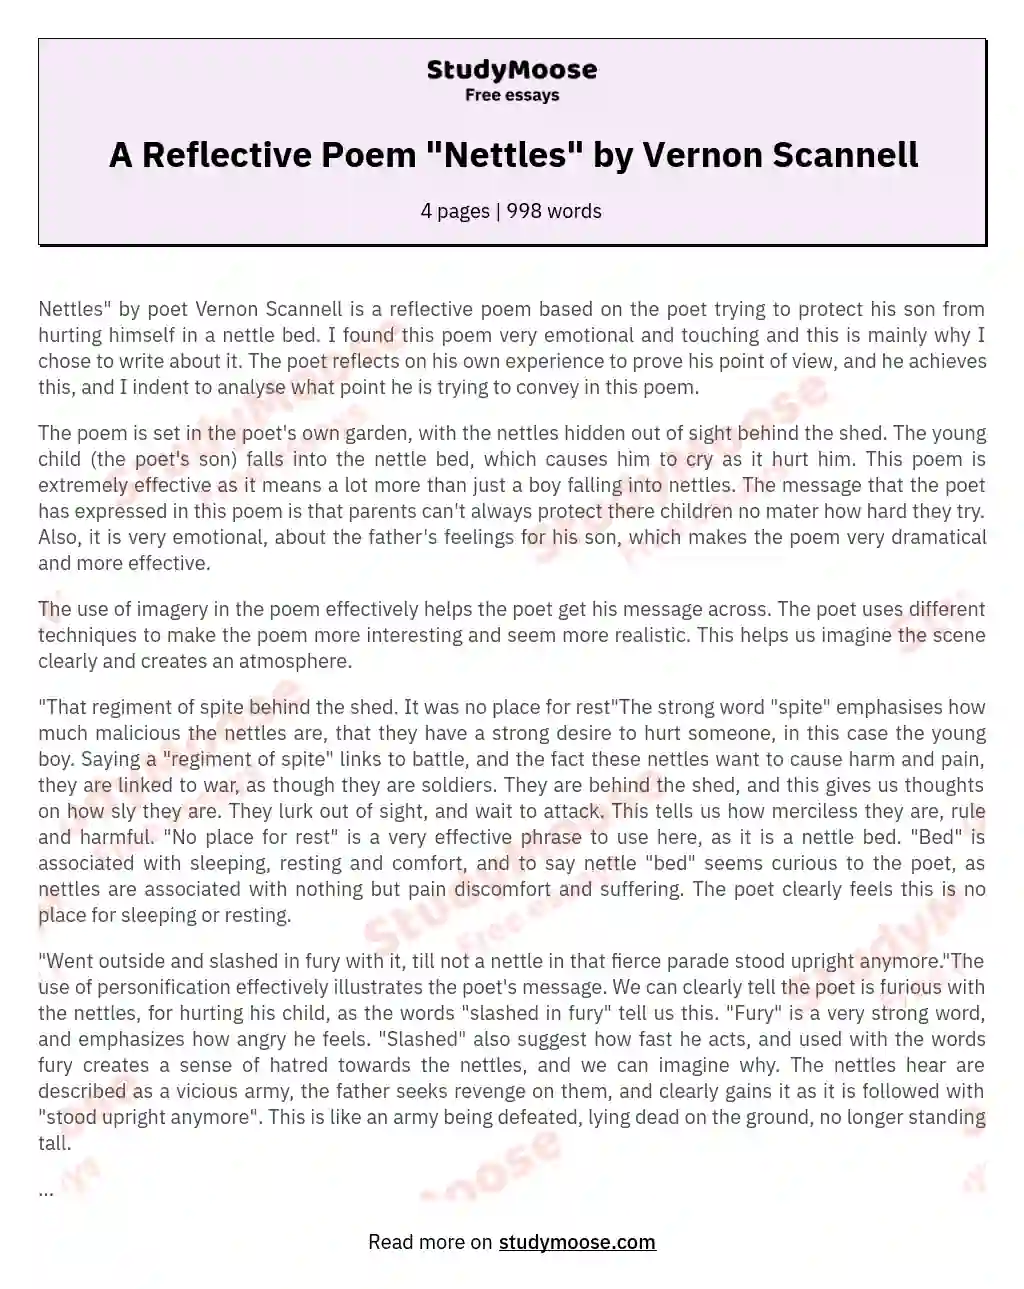 A Reflective Poem "Nettles" by Vernon Scannell essay